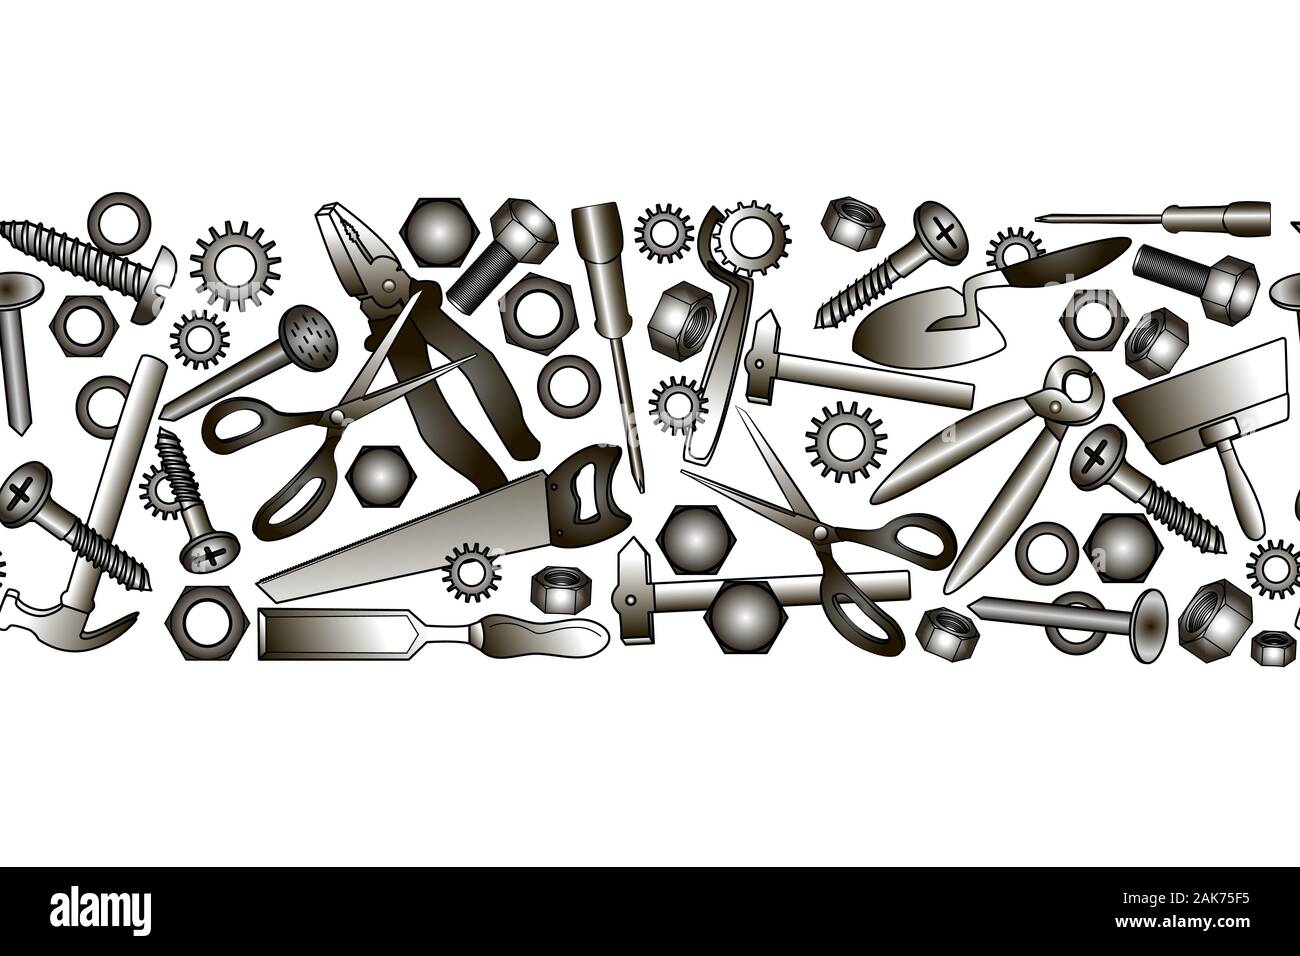 Construction tools vector icons seamless border. Hand equipment background. Stock Vector